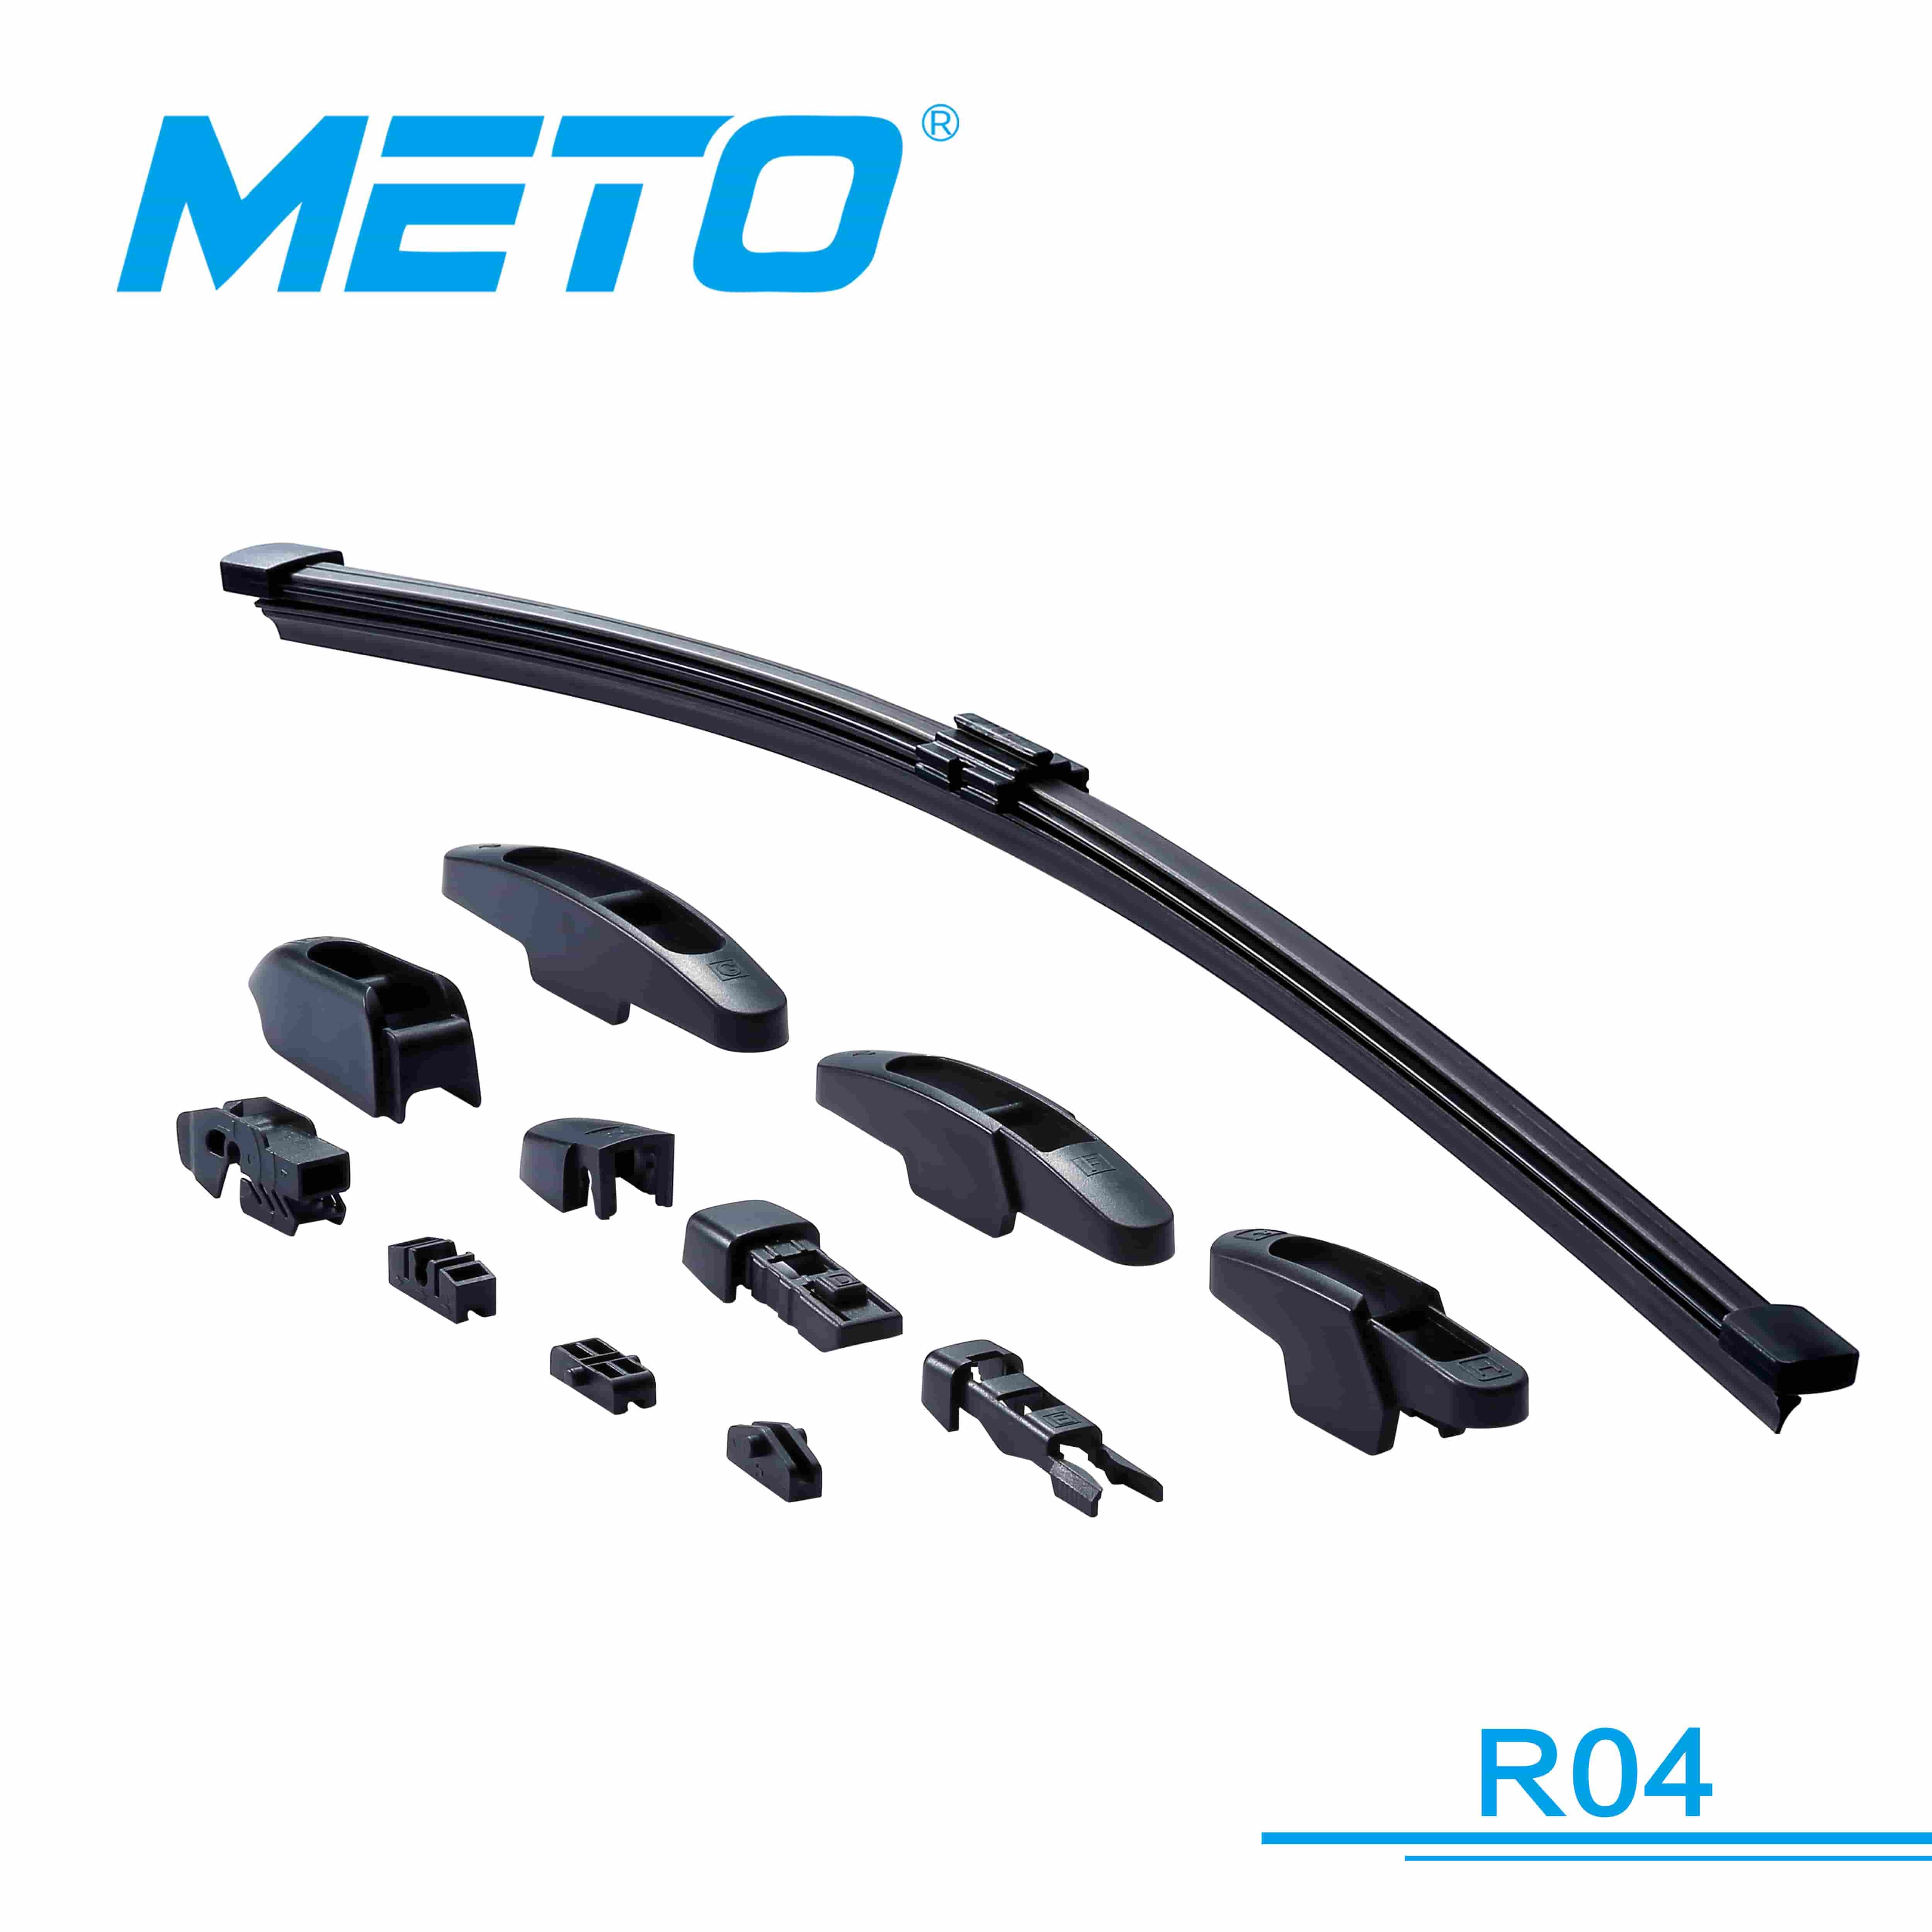 Rear Soft wiper blade fit for 99% car